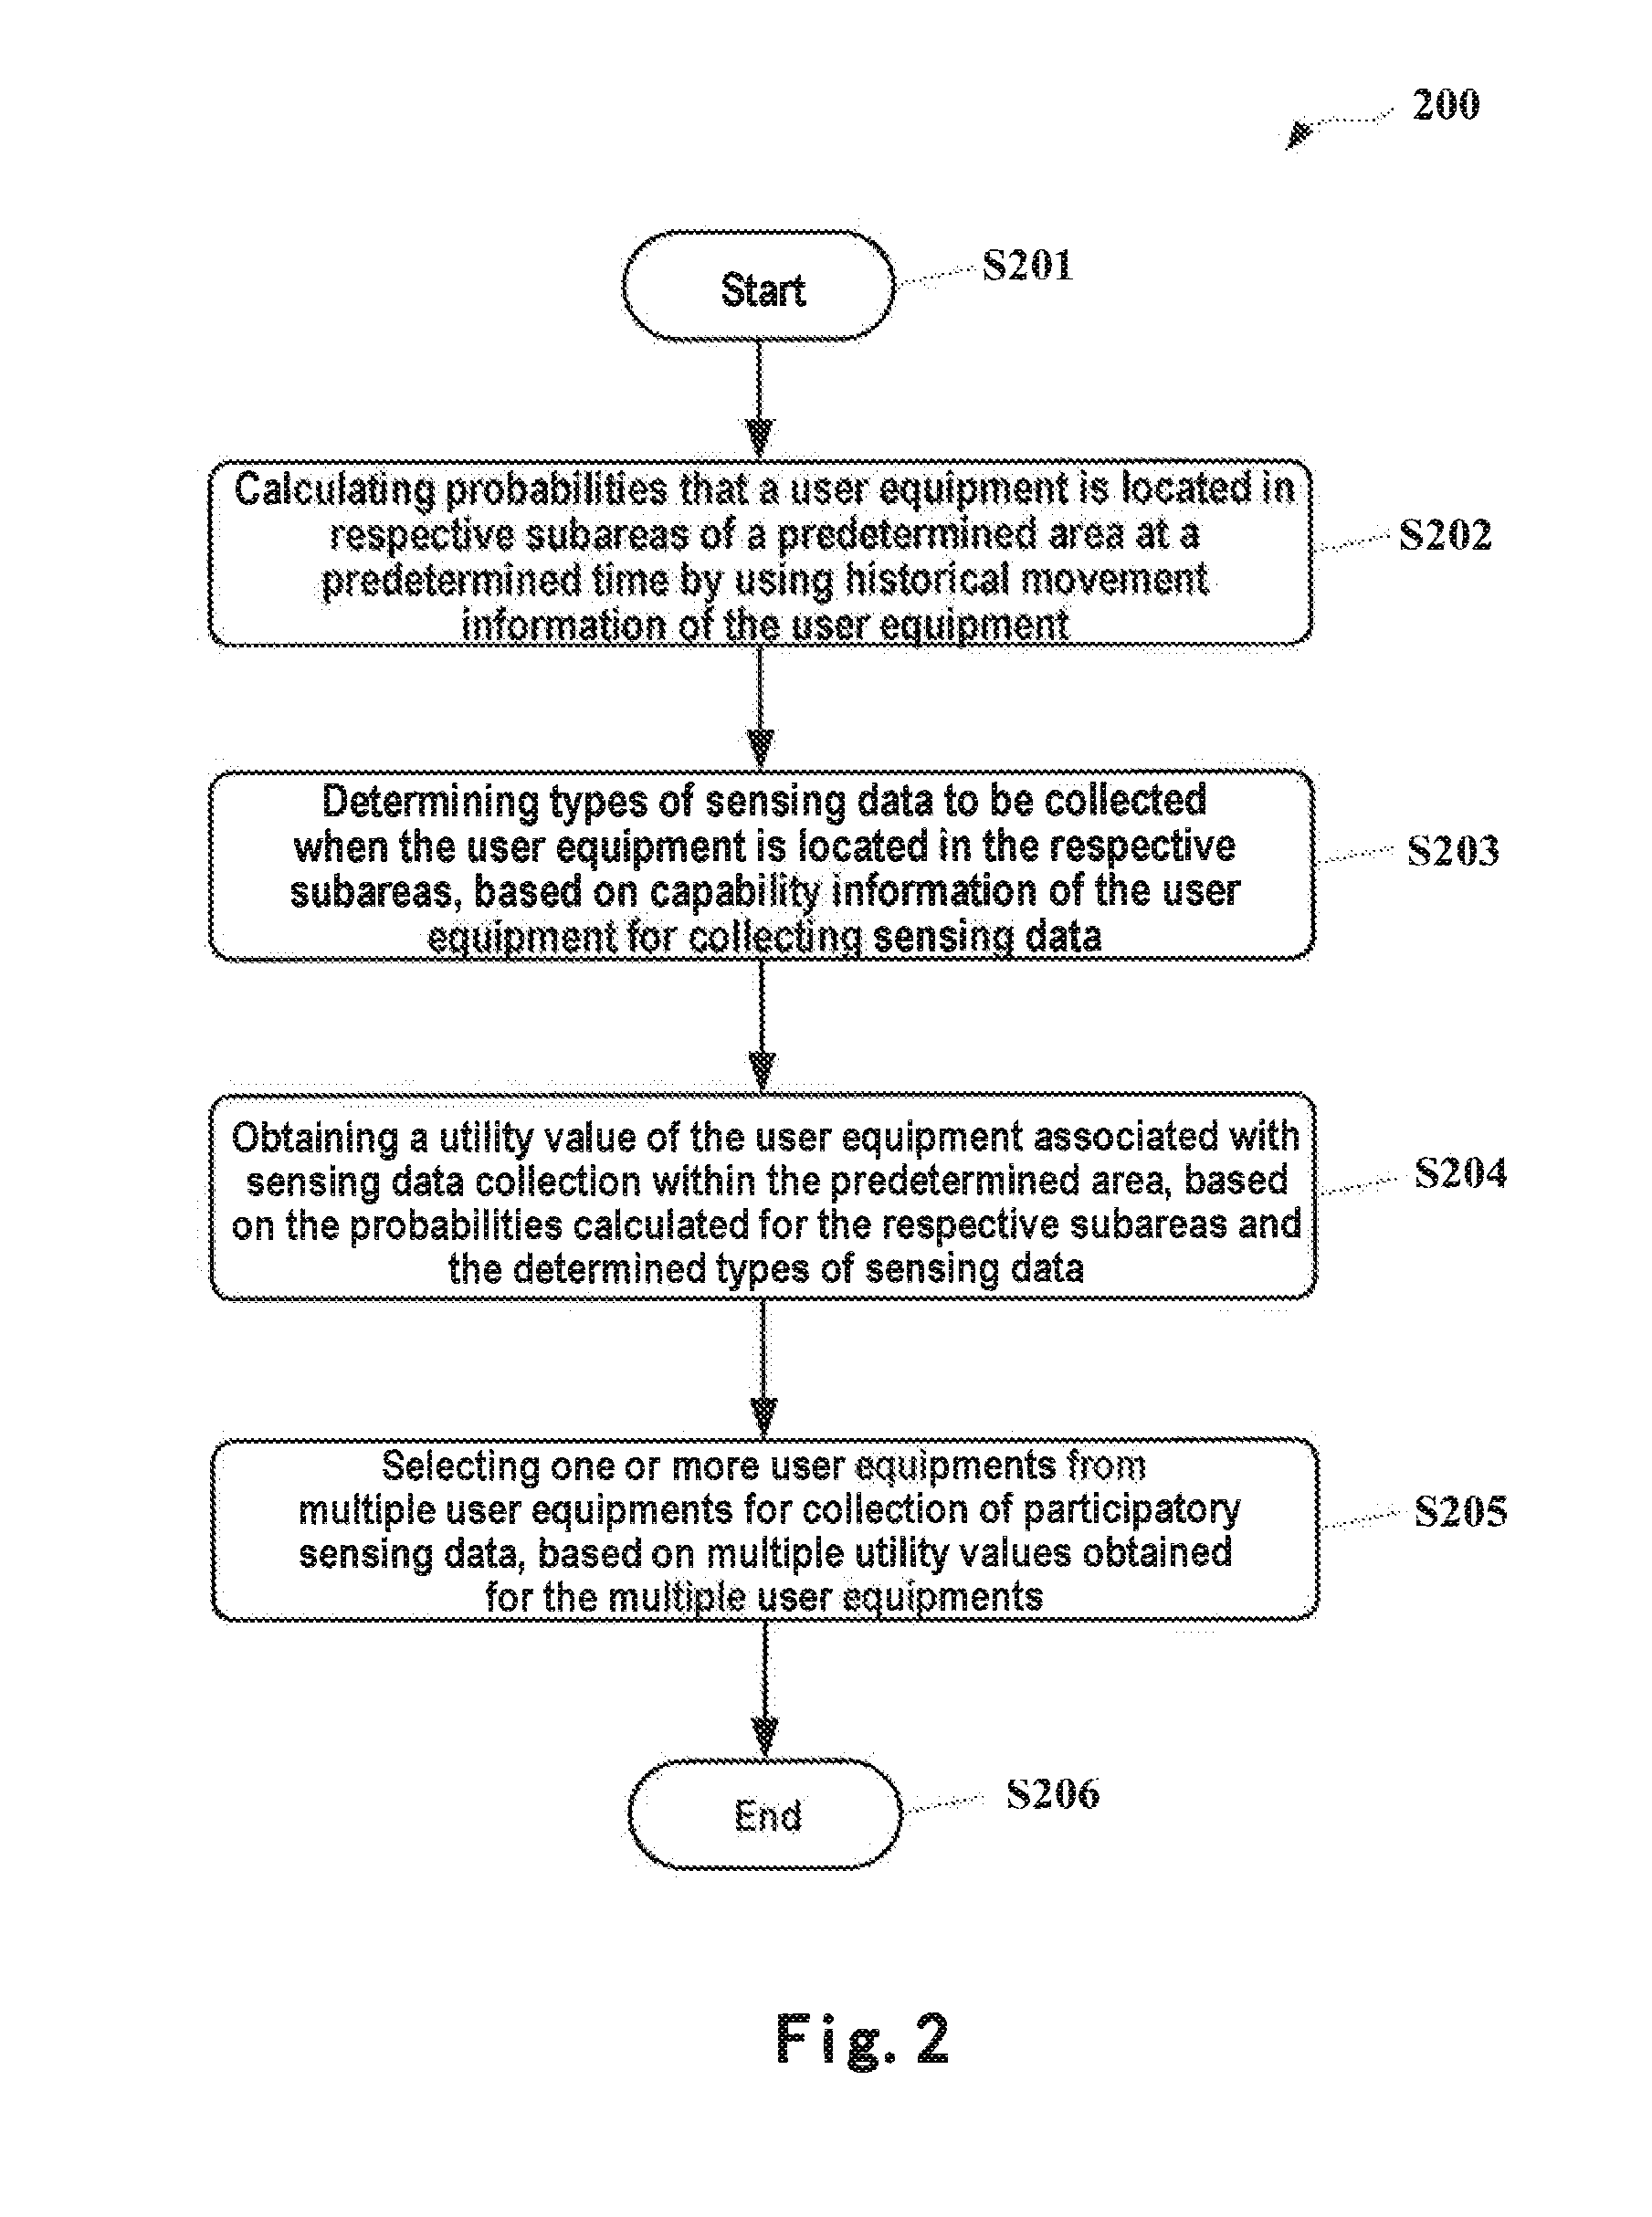 Method and apparatus for participatory sensing data collection